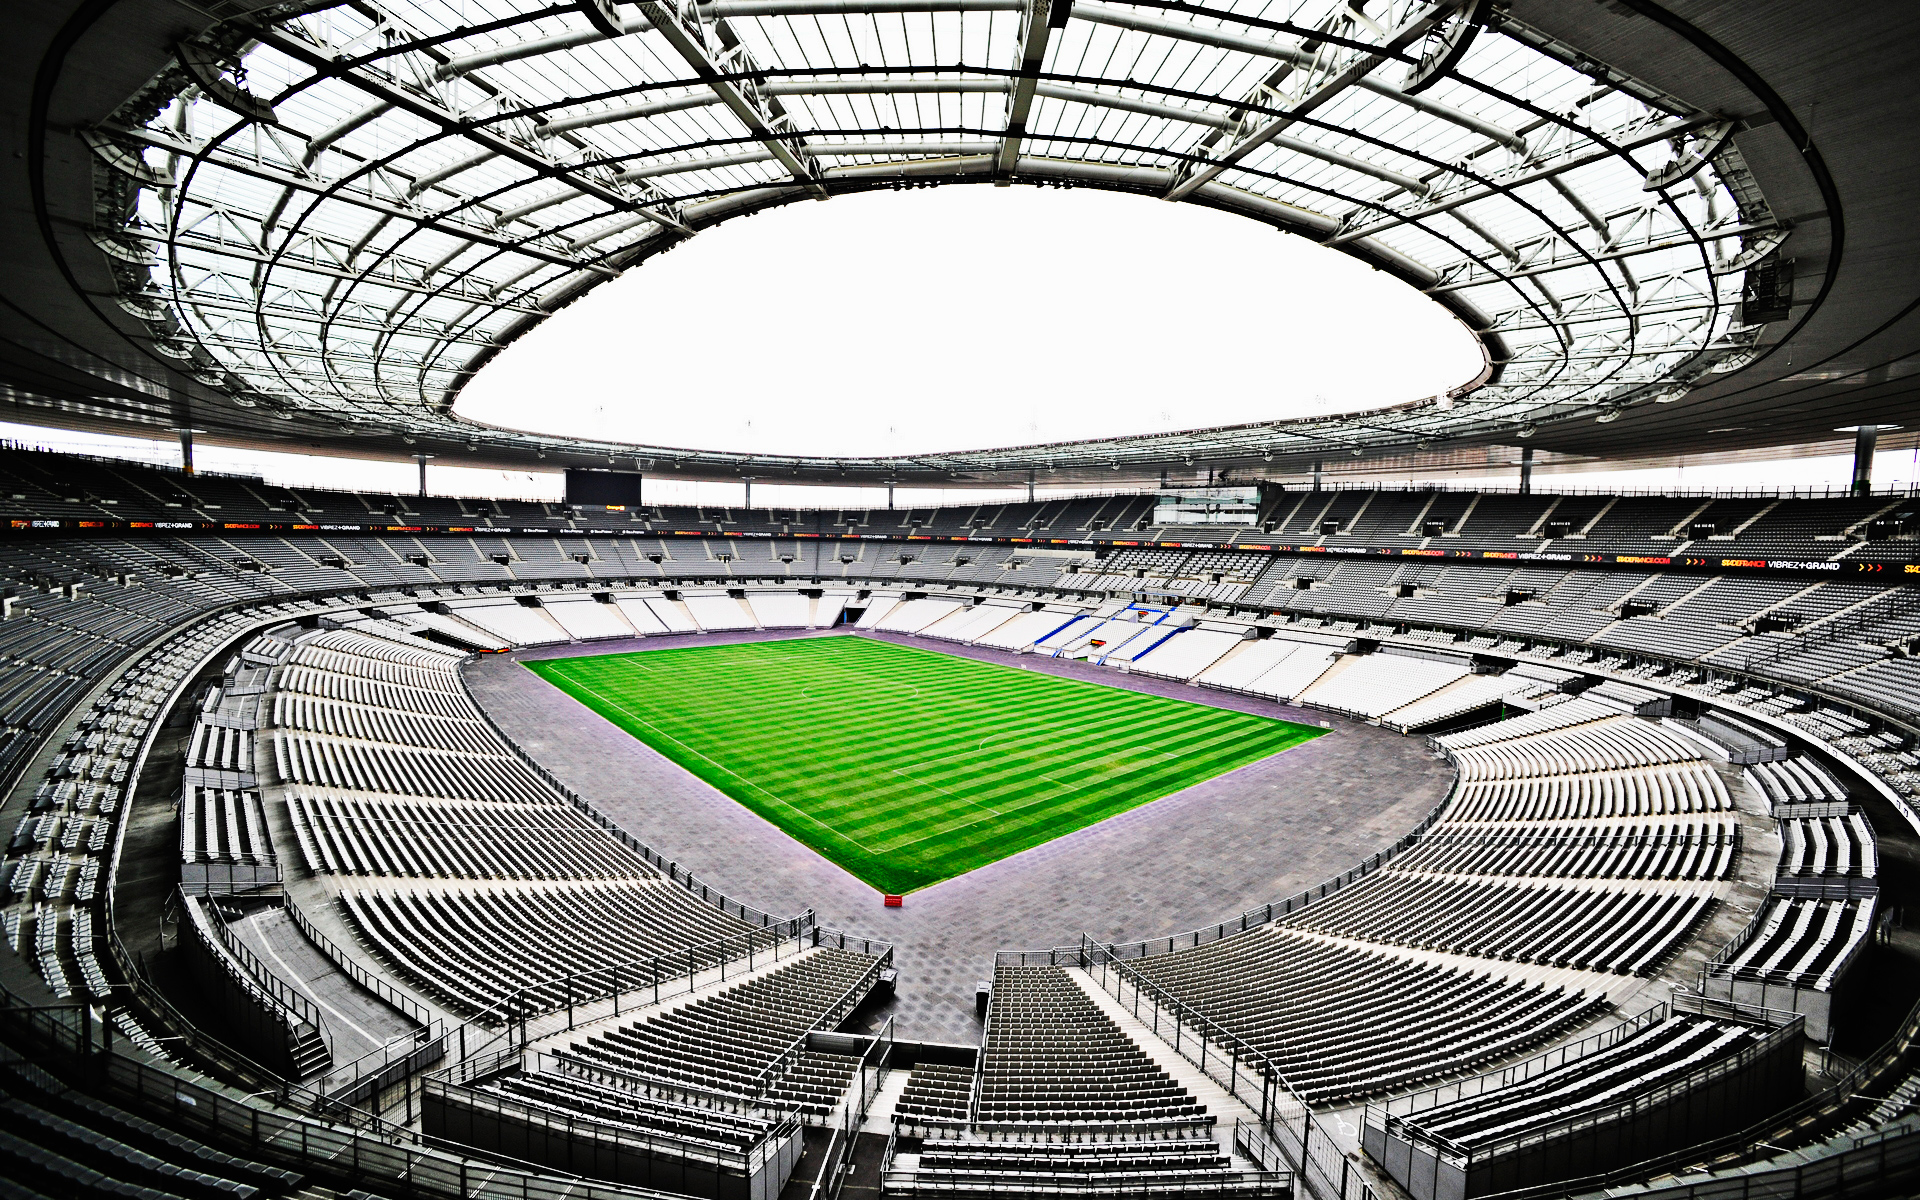 Download wallpaper Stade De France, Saint Denis, Paris, France, inside view, football field, french football stadium, football, France national football team for desktop with resolution 1920x1200. High Quality HD picture wallpaper